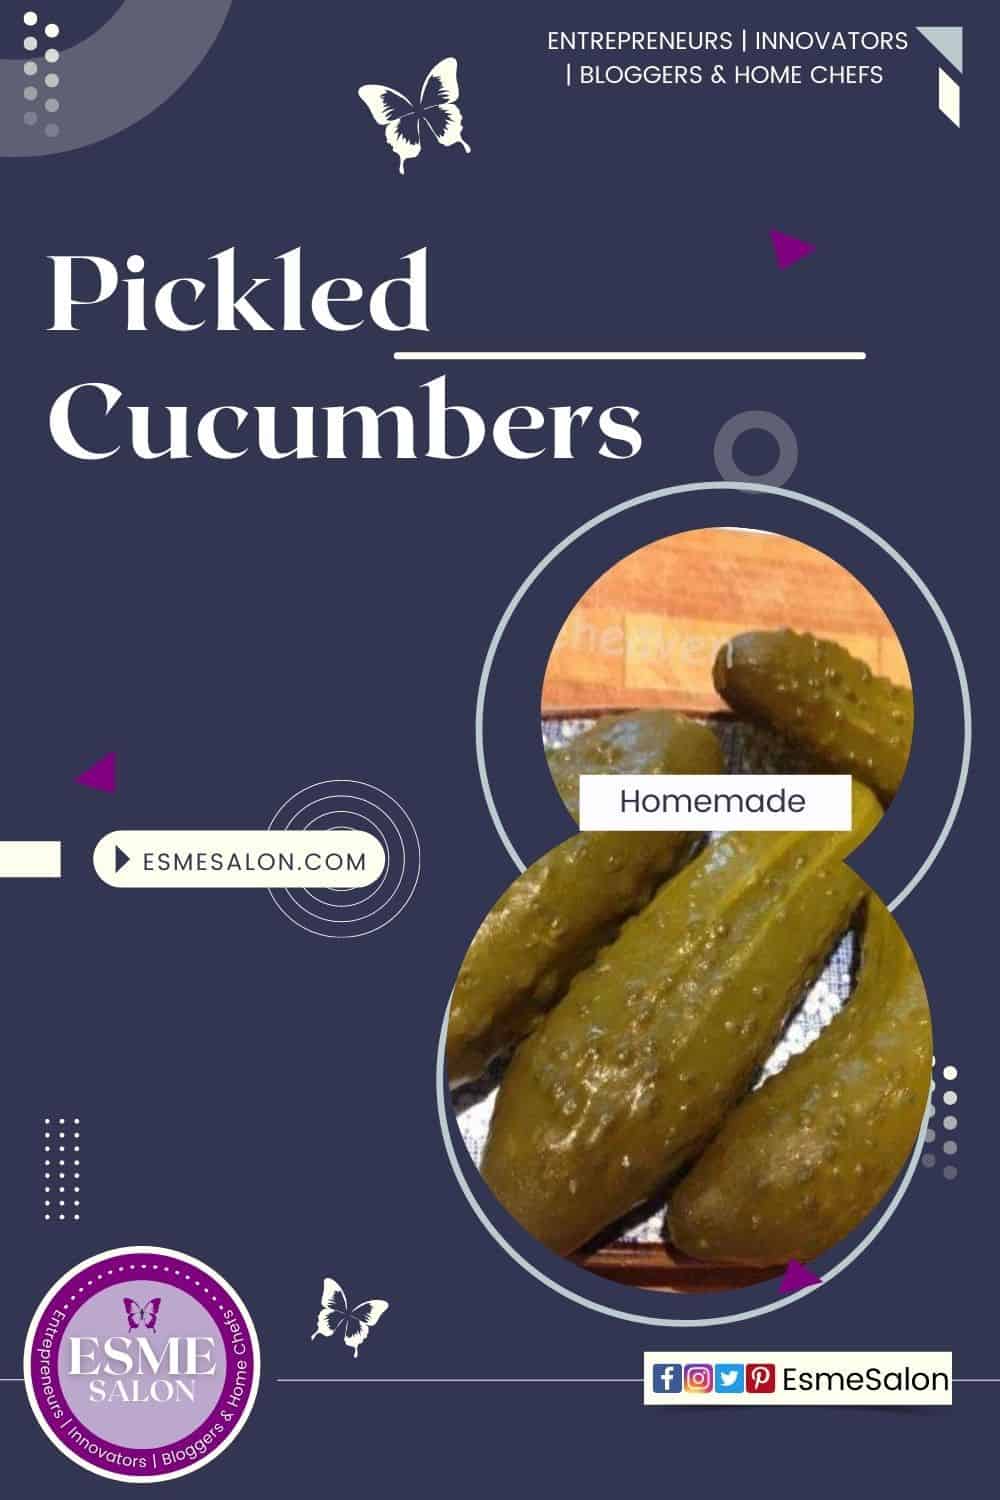 A wooden board with 8 homemade pickled cucumbers